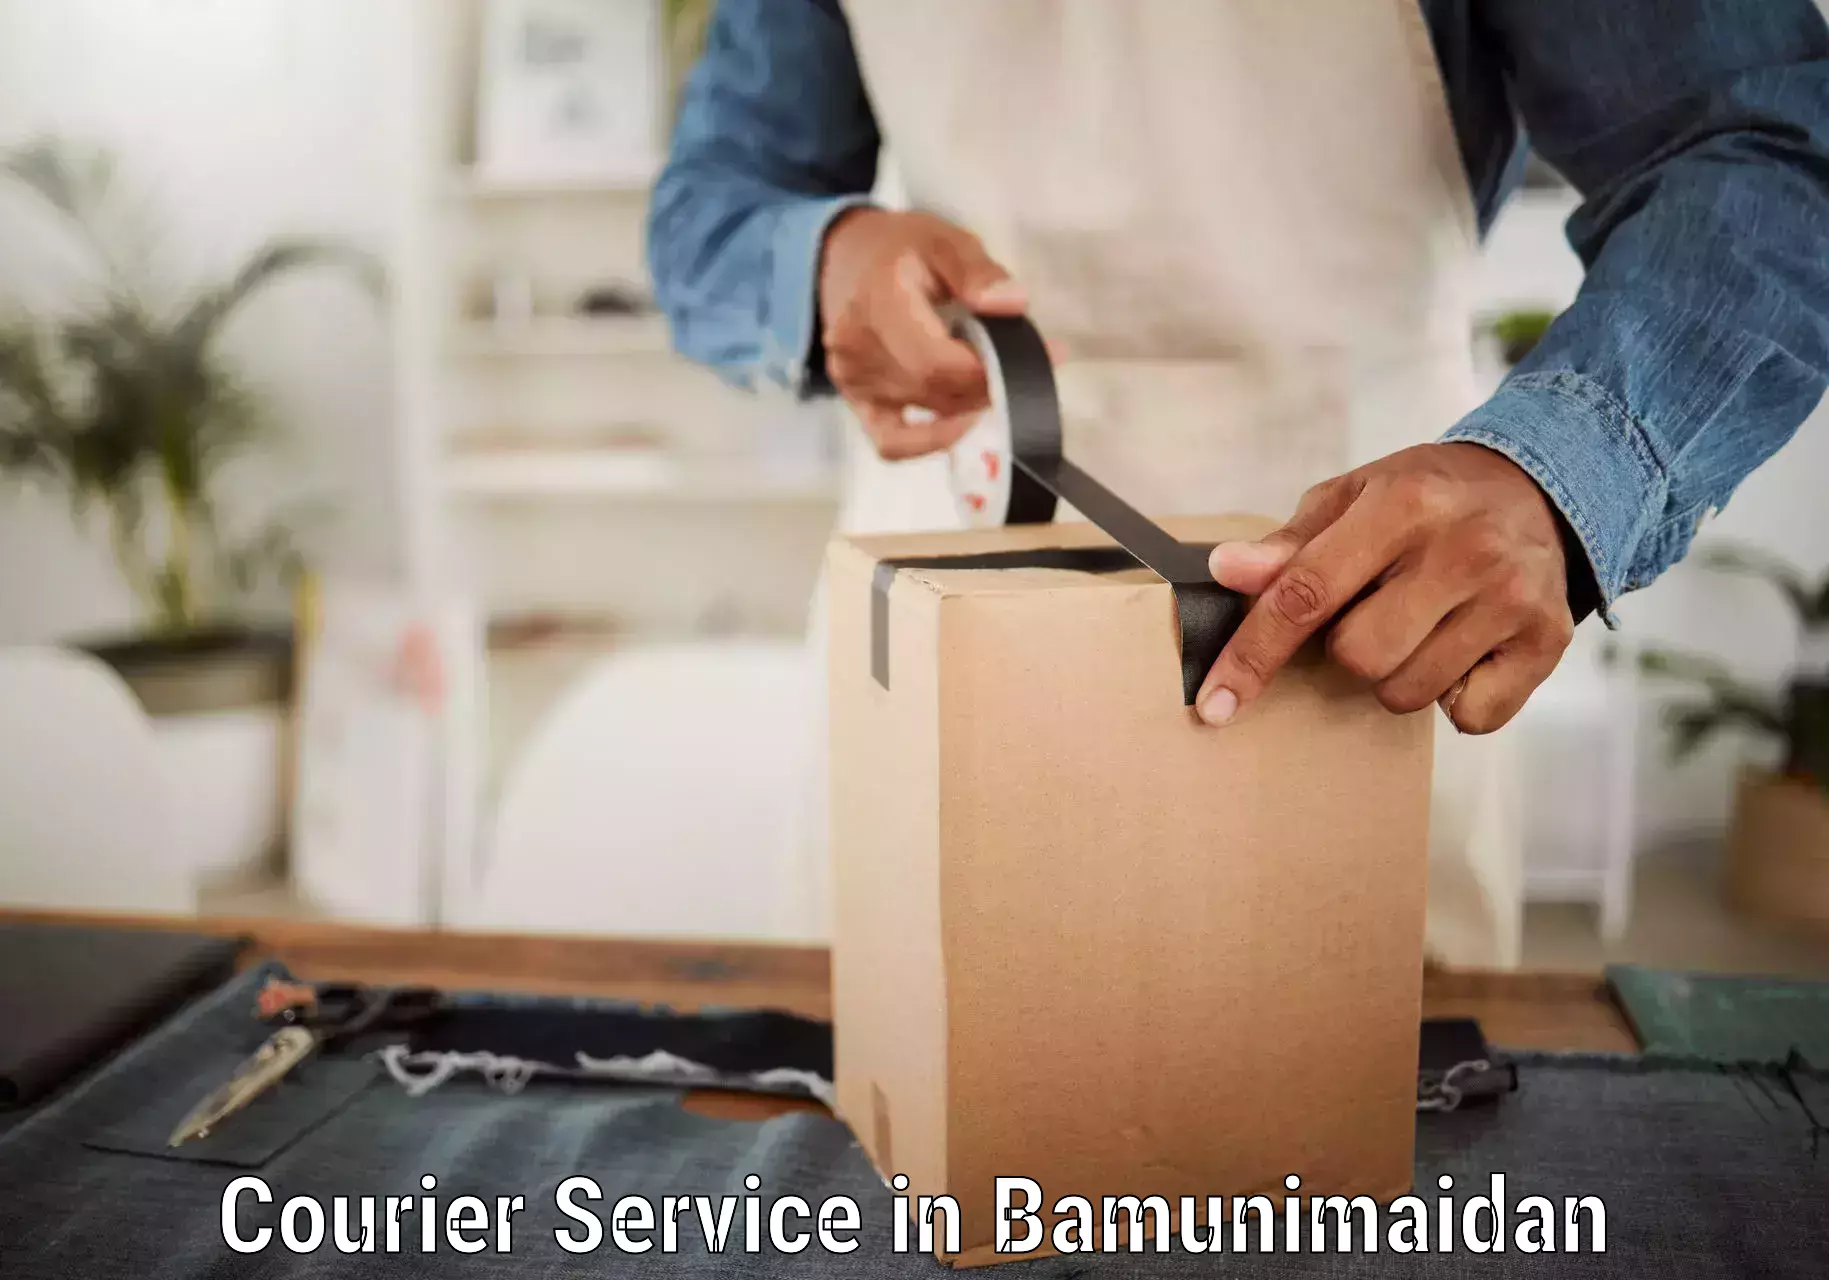 Customer-oriented courier services in Bamunimaidan